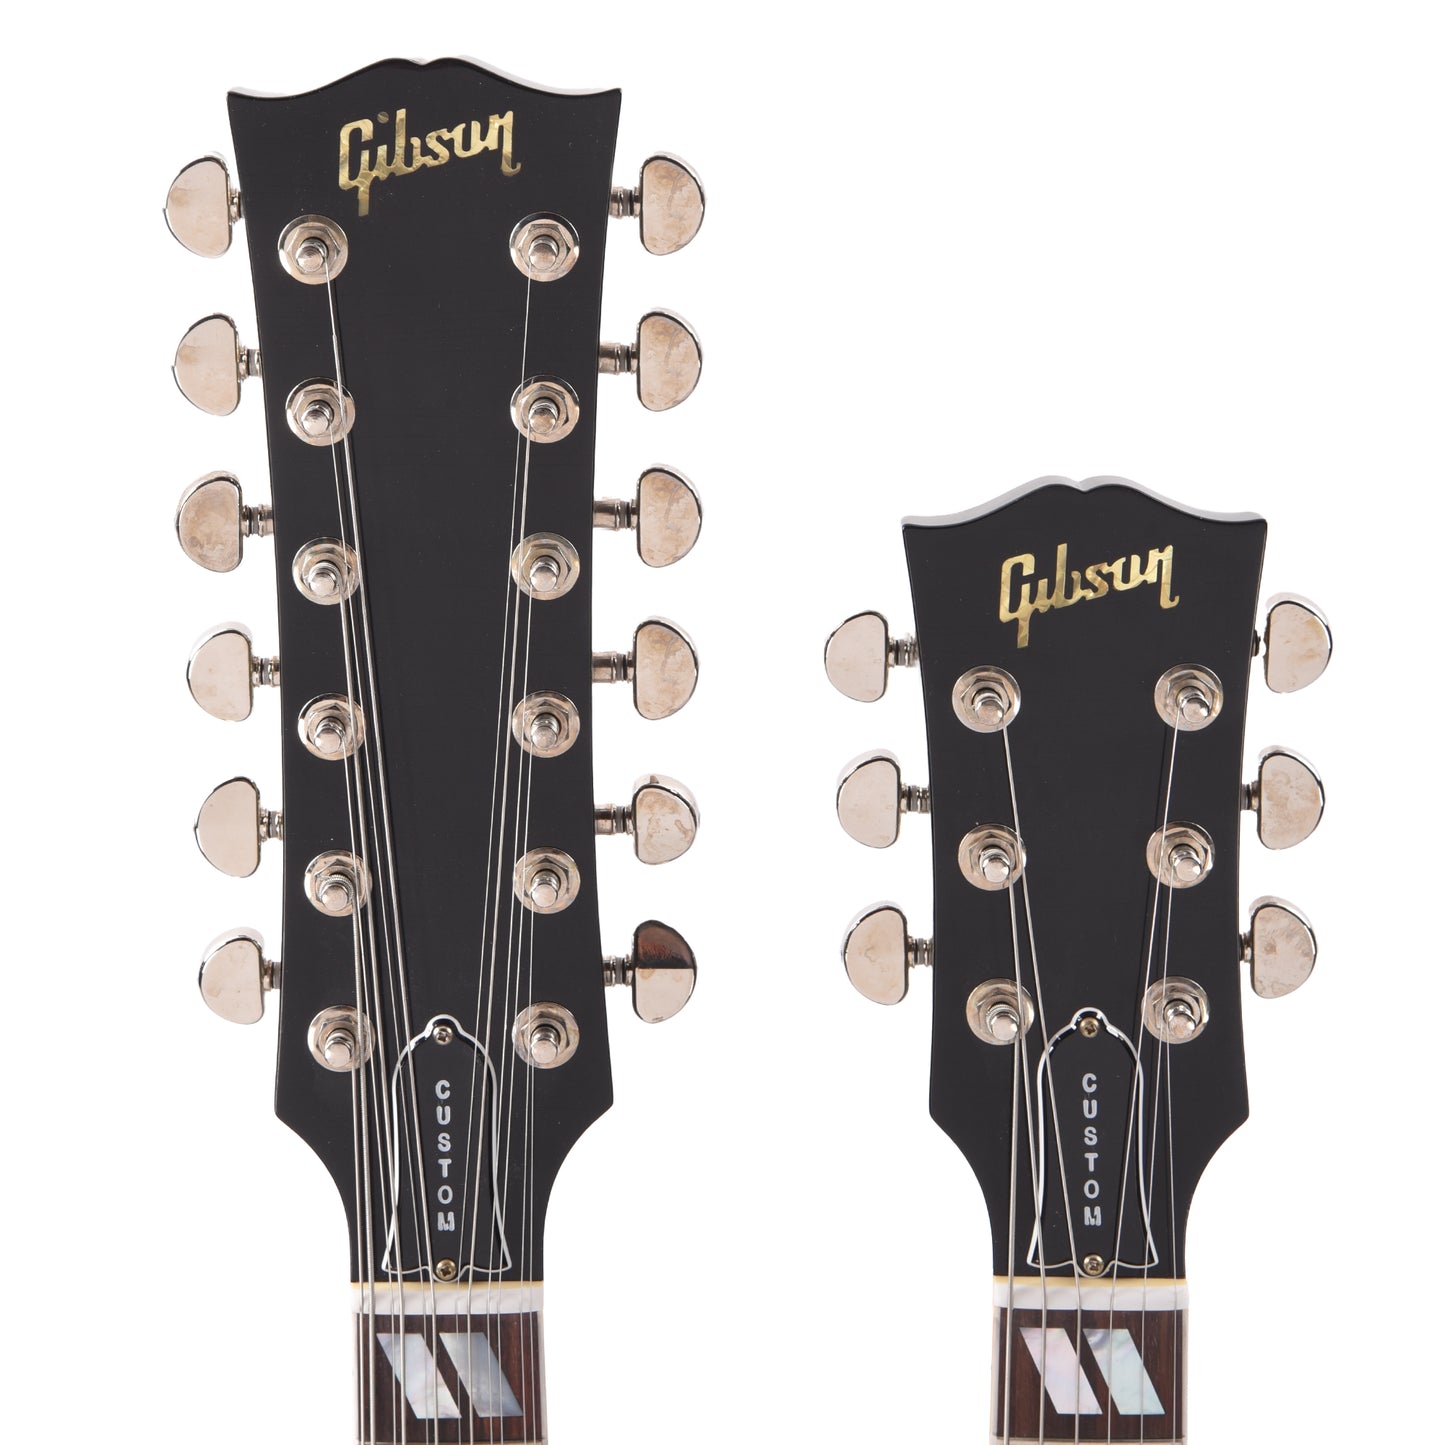 Gibson Custom Shop Murphy Lab EDS-1275 Doubleneck "CME Spec" Ultra Light Aged Antique Olive Drab w/Grovers